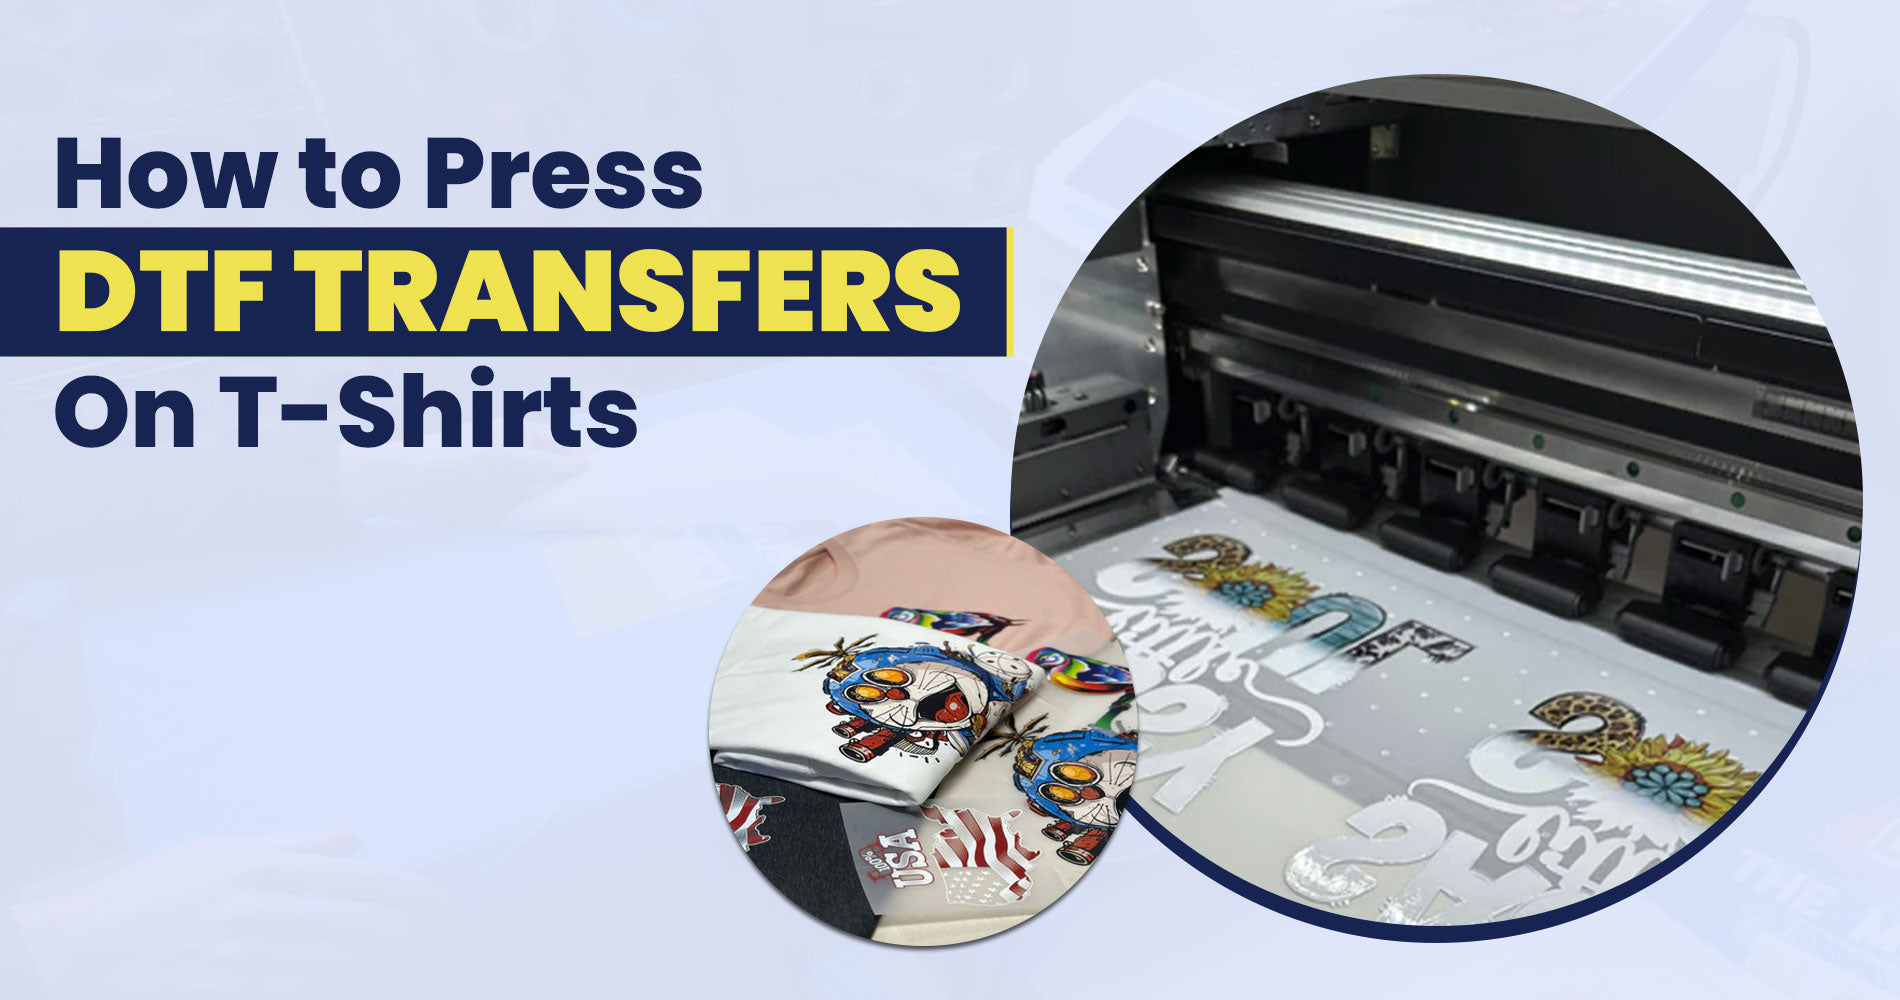 How to Heat Press a T-Shirt (Step-by-Step Guide) - Transfer